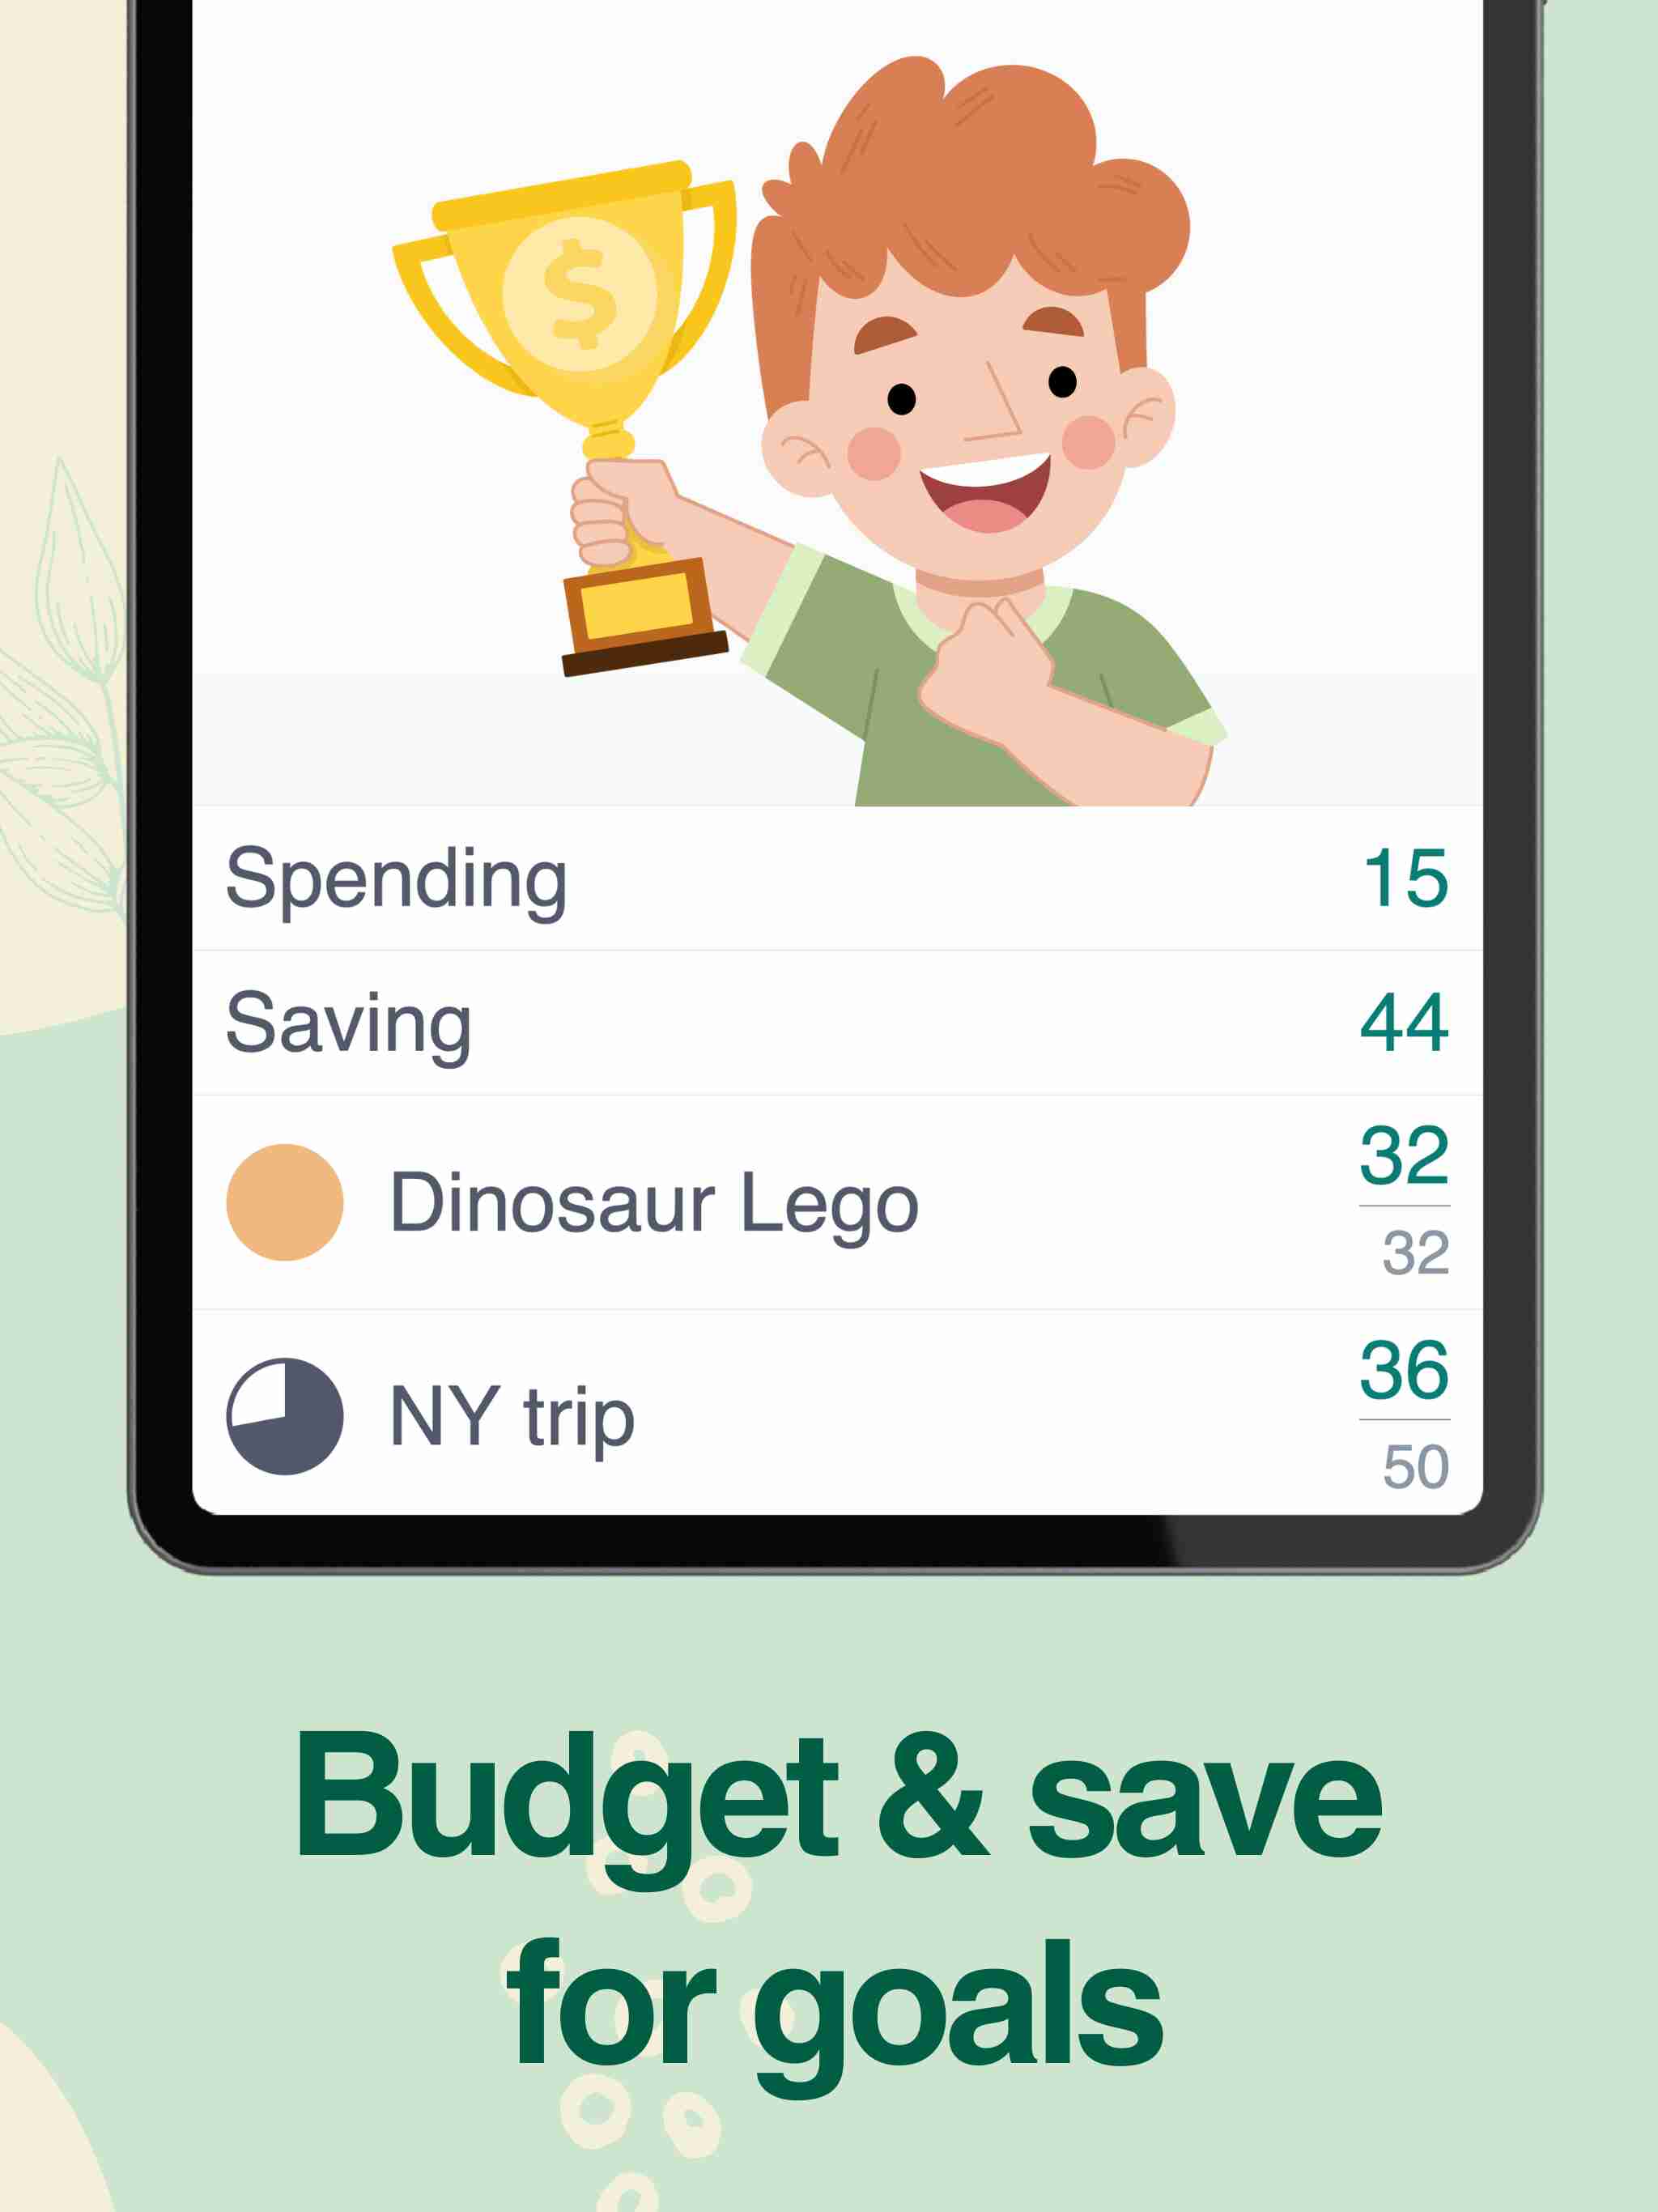 Budget & save for goals; spending, saving, giving